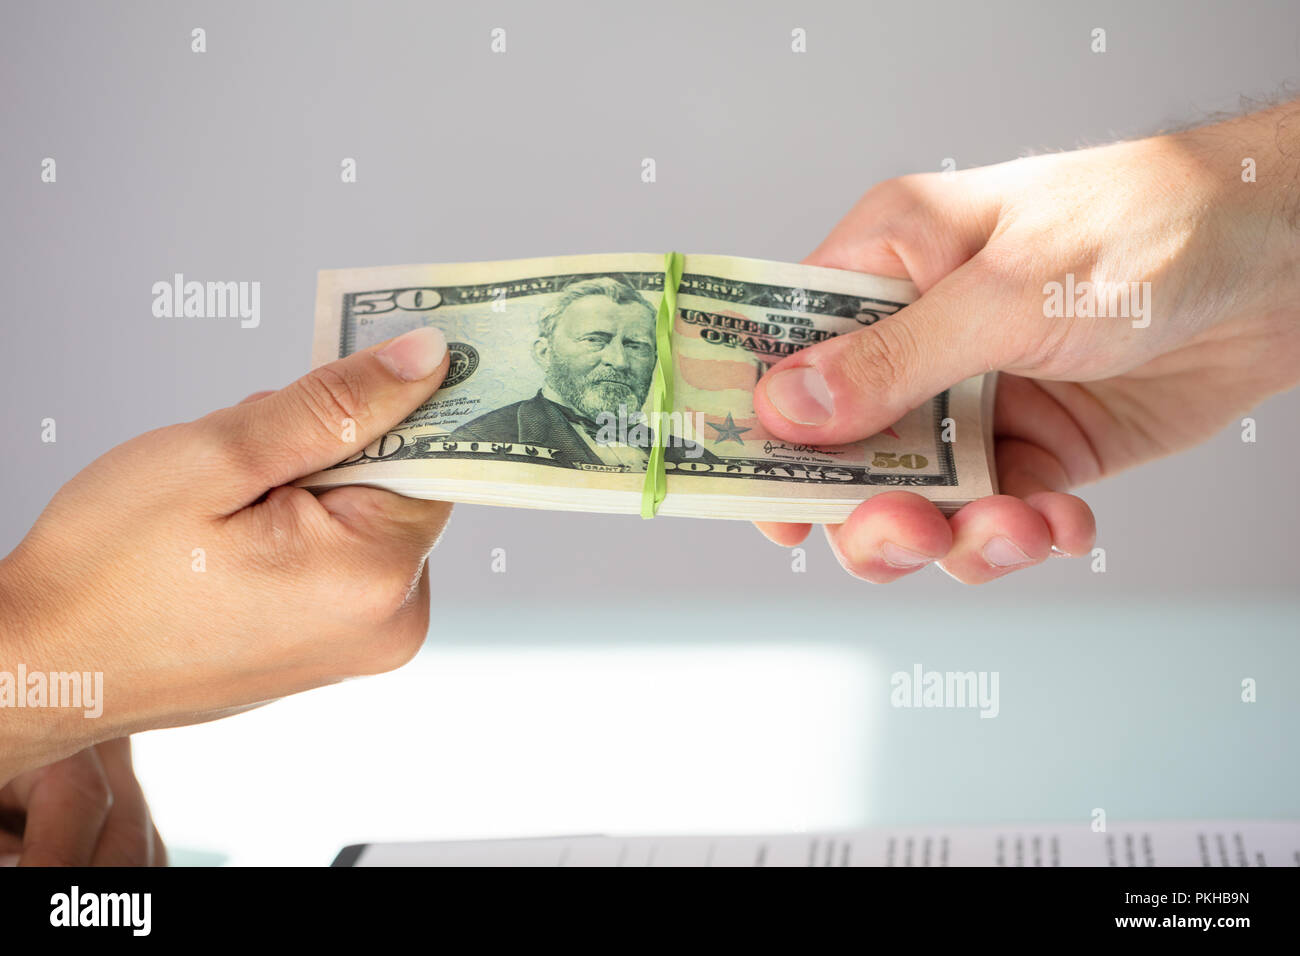 Close-up Of A Businessperson's Hand Taking Bribe From Partner Stock Photo